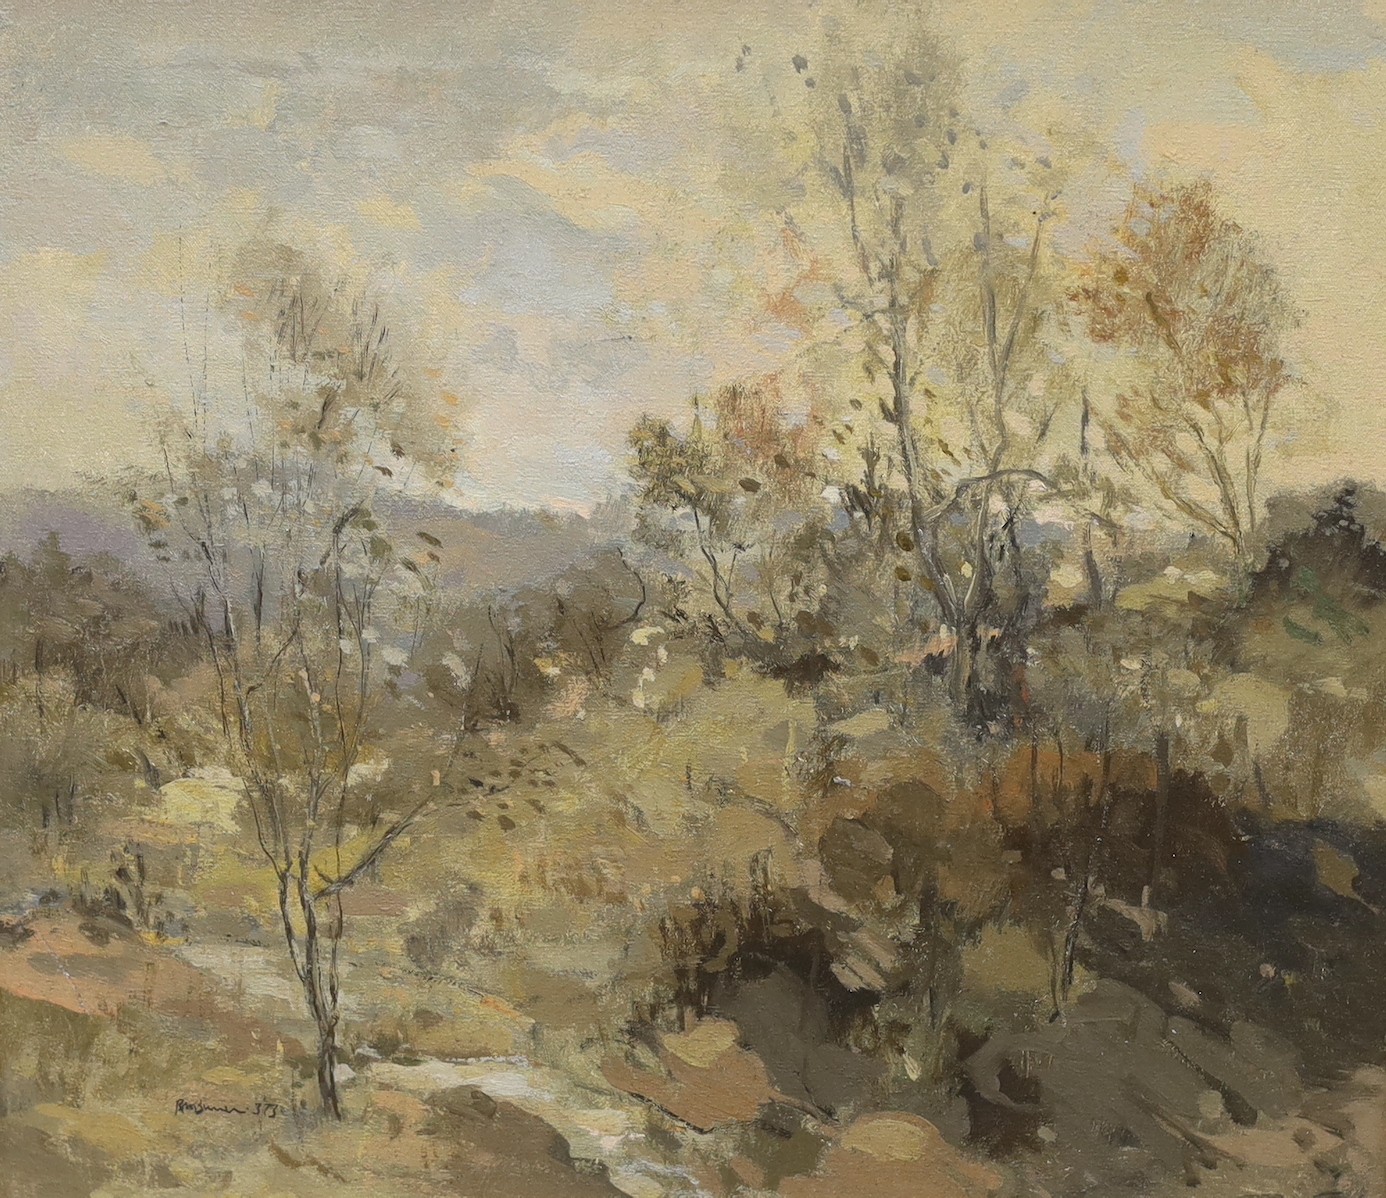 RMB, oil on canvas, Hillside scene, signed and dated '73, 45 x 50cm